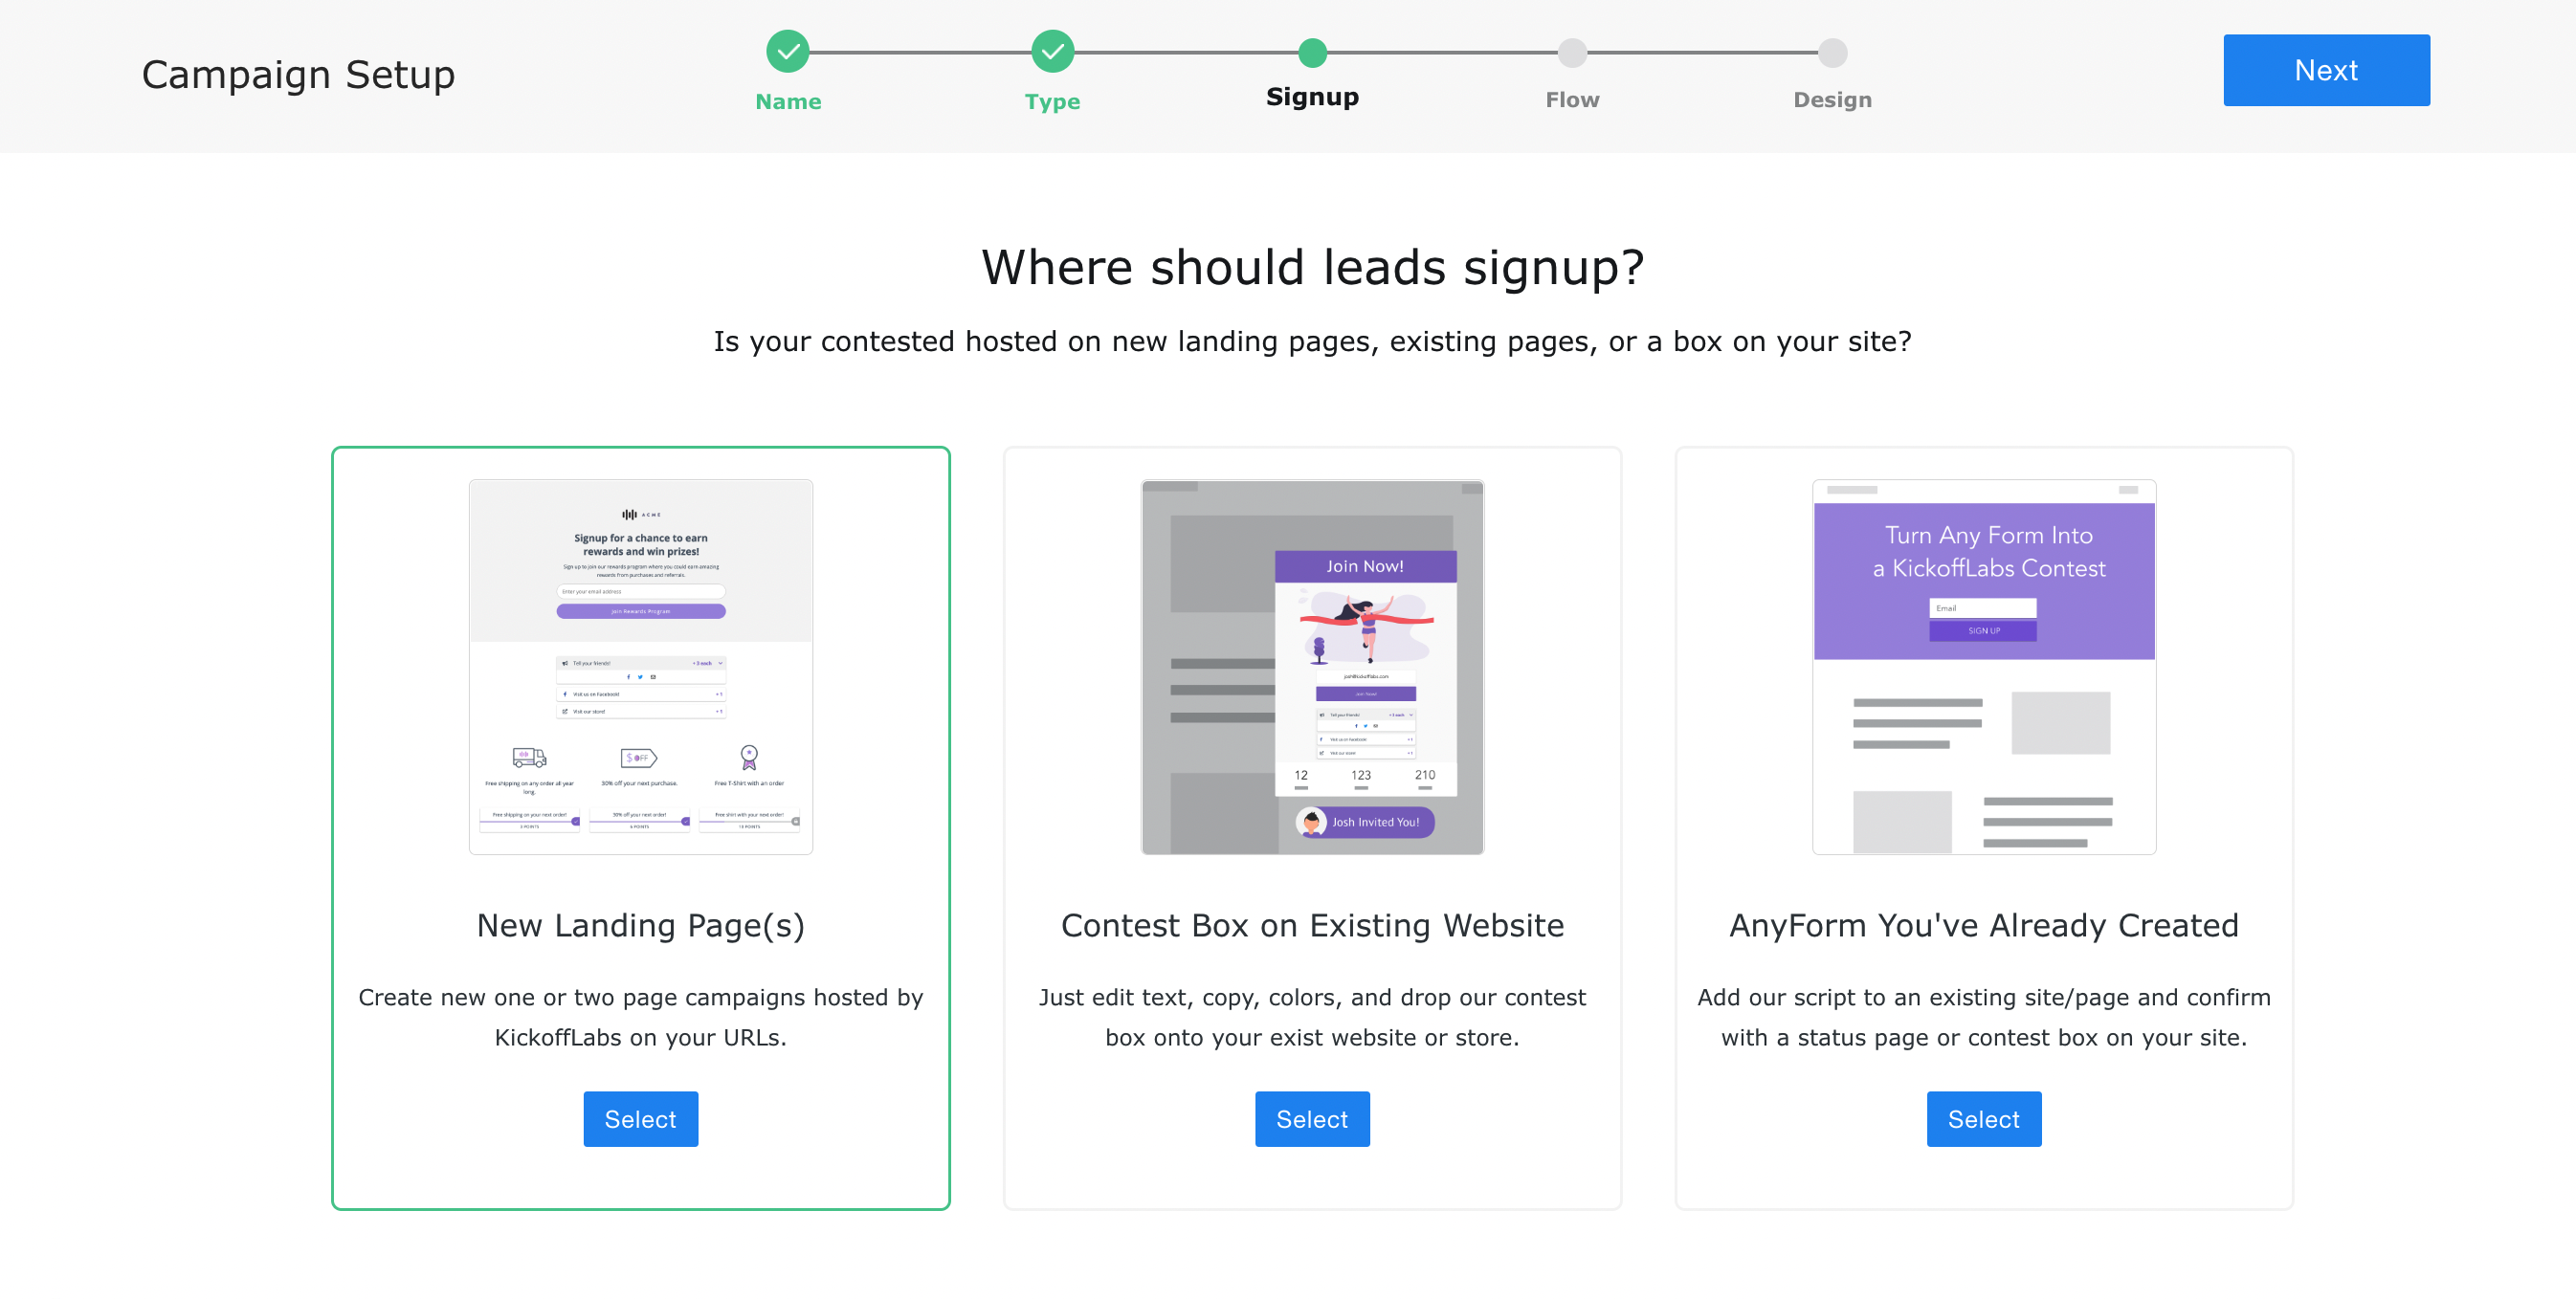 Choose the signup flow